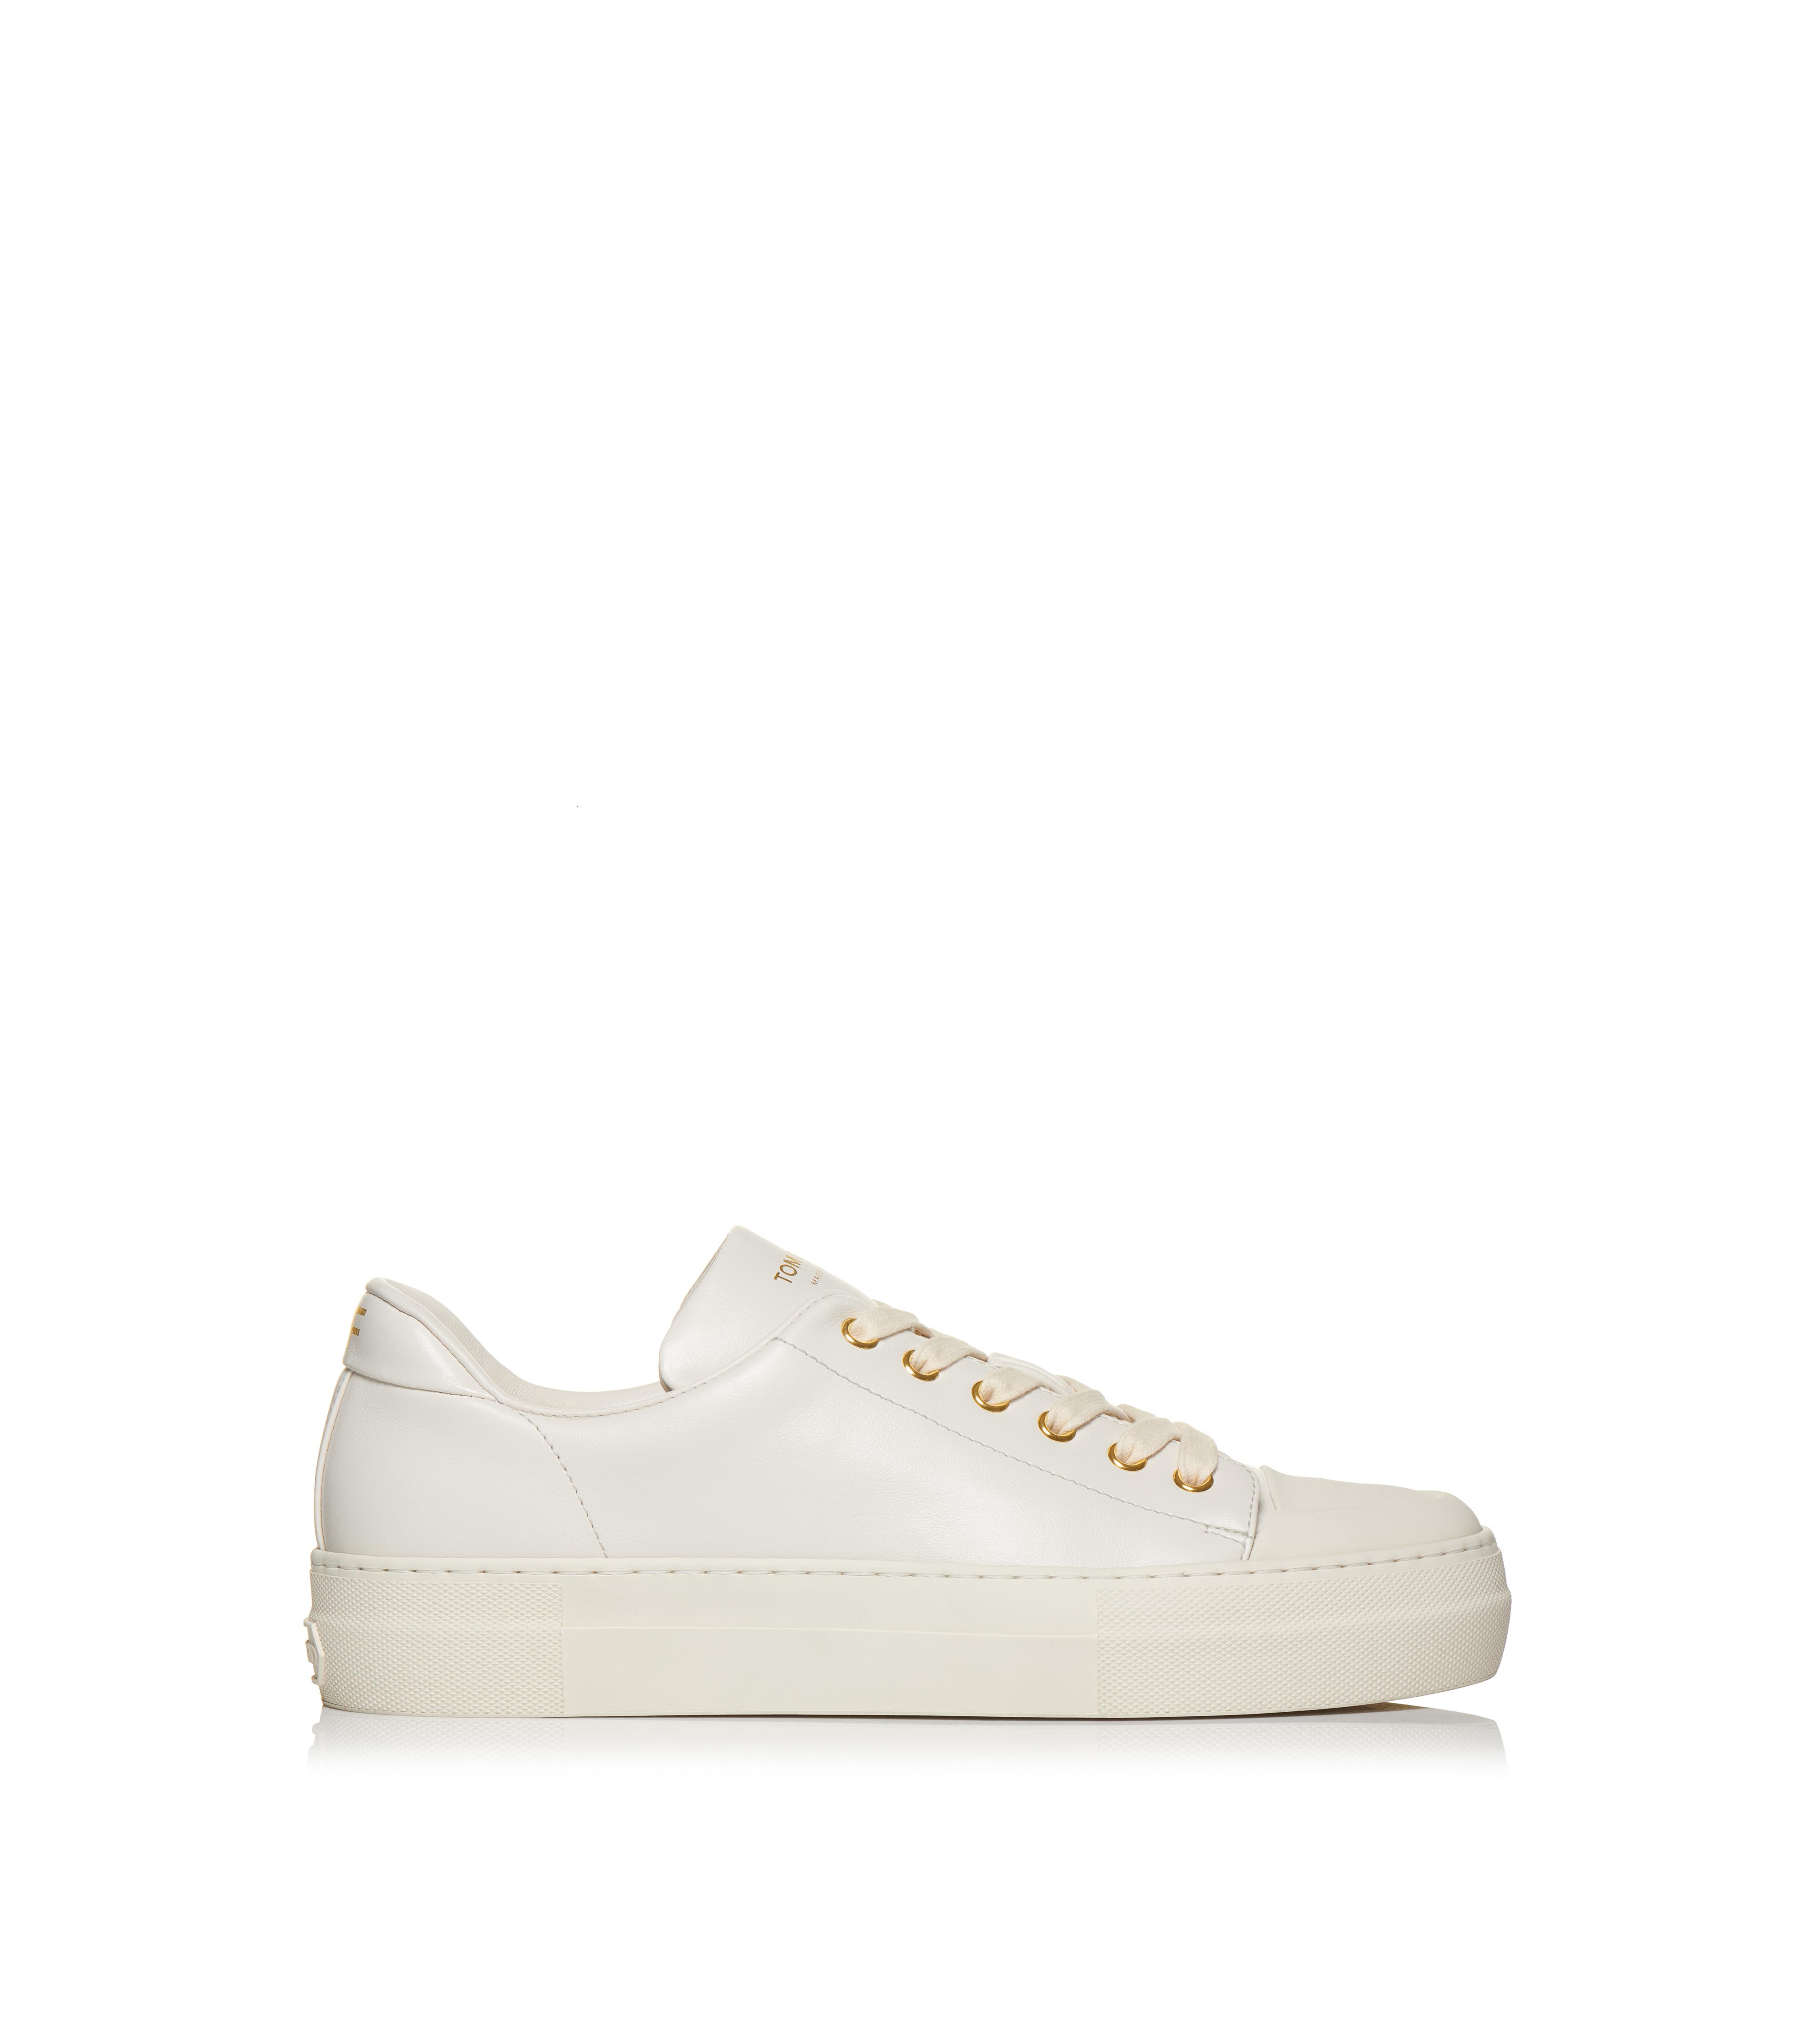 Sneakers Women's Shoes | TomFord.com